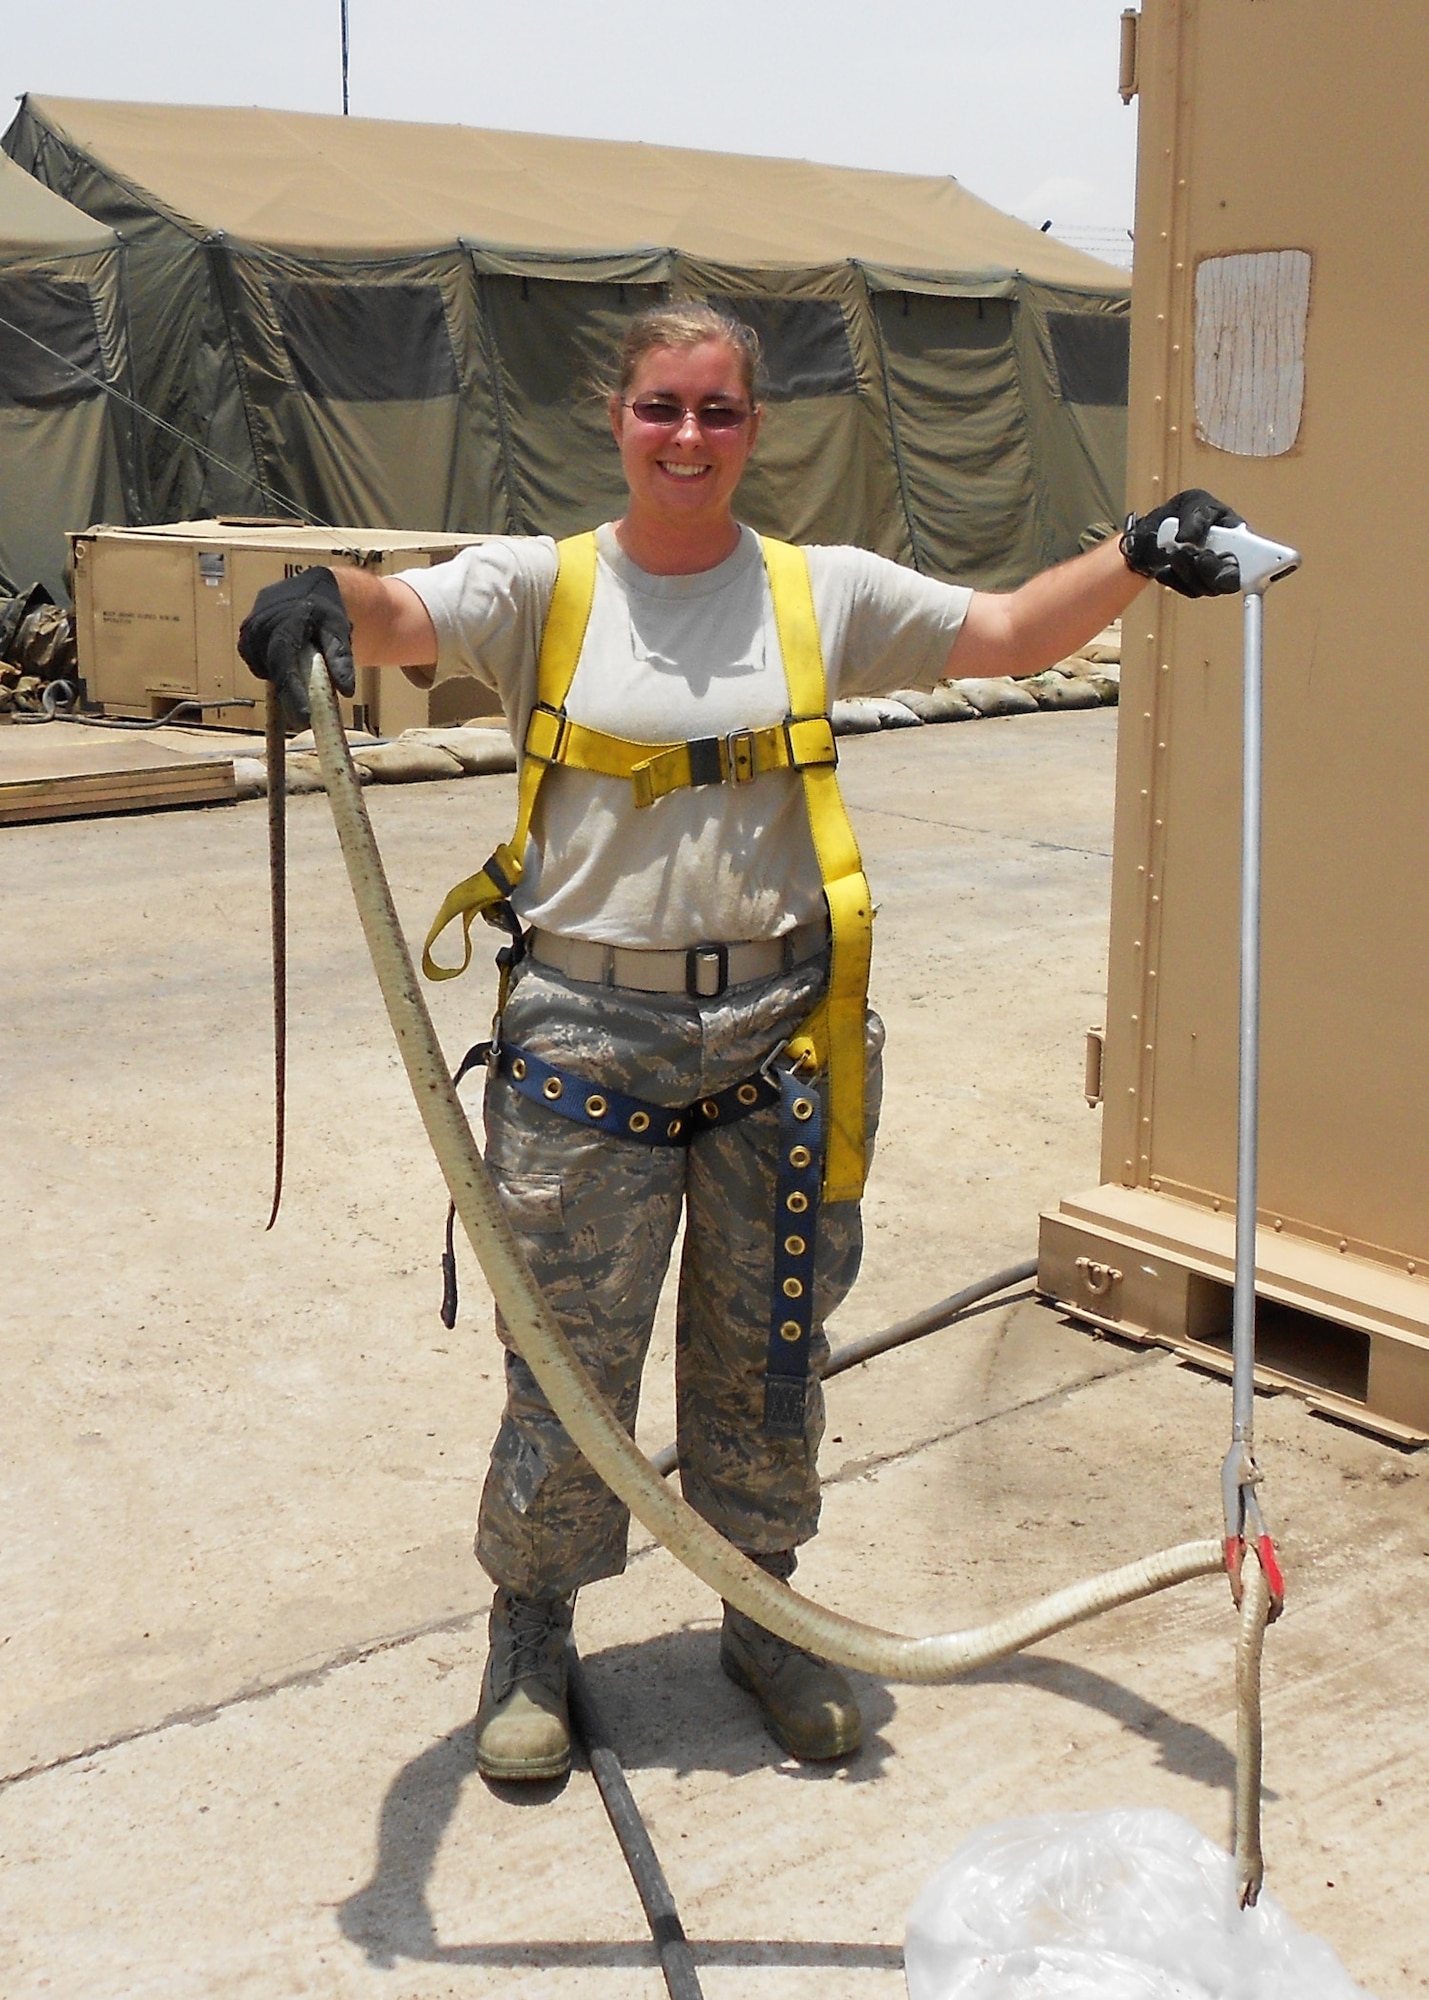 Air Force Reserve Master Sgt. Jennifer Alexander displays a highly venomous black mamba she helped remove from a tree at an entrance to her deployed location.  In her duties as the deployed pest control manager for a U.S. Africa Command forward operating base, the Duke Field civil engineering Airman often works with host nation military officials to eliminate dangerous wildlife hazards and ensure non-threatening wildlife found on and near her base are safely returned to the wild. (Courtesy photo)